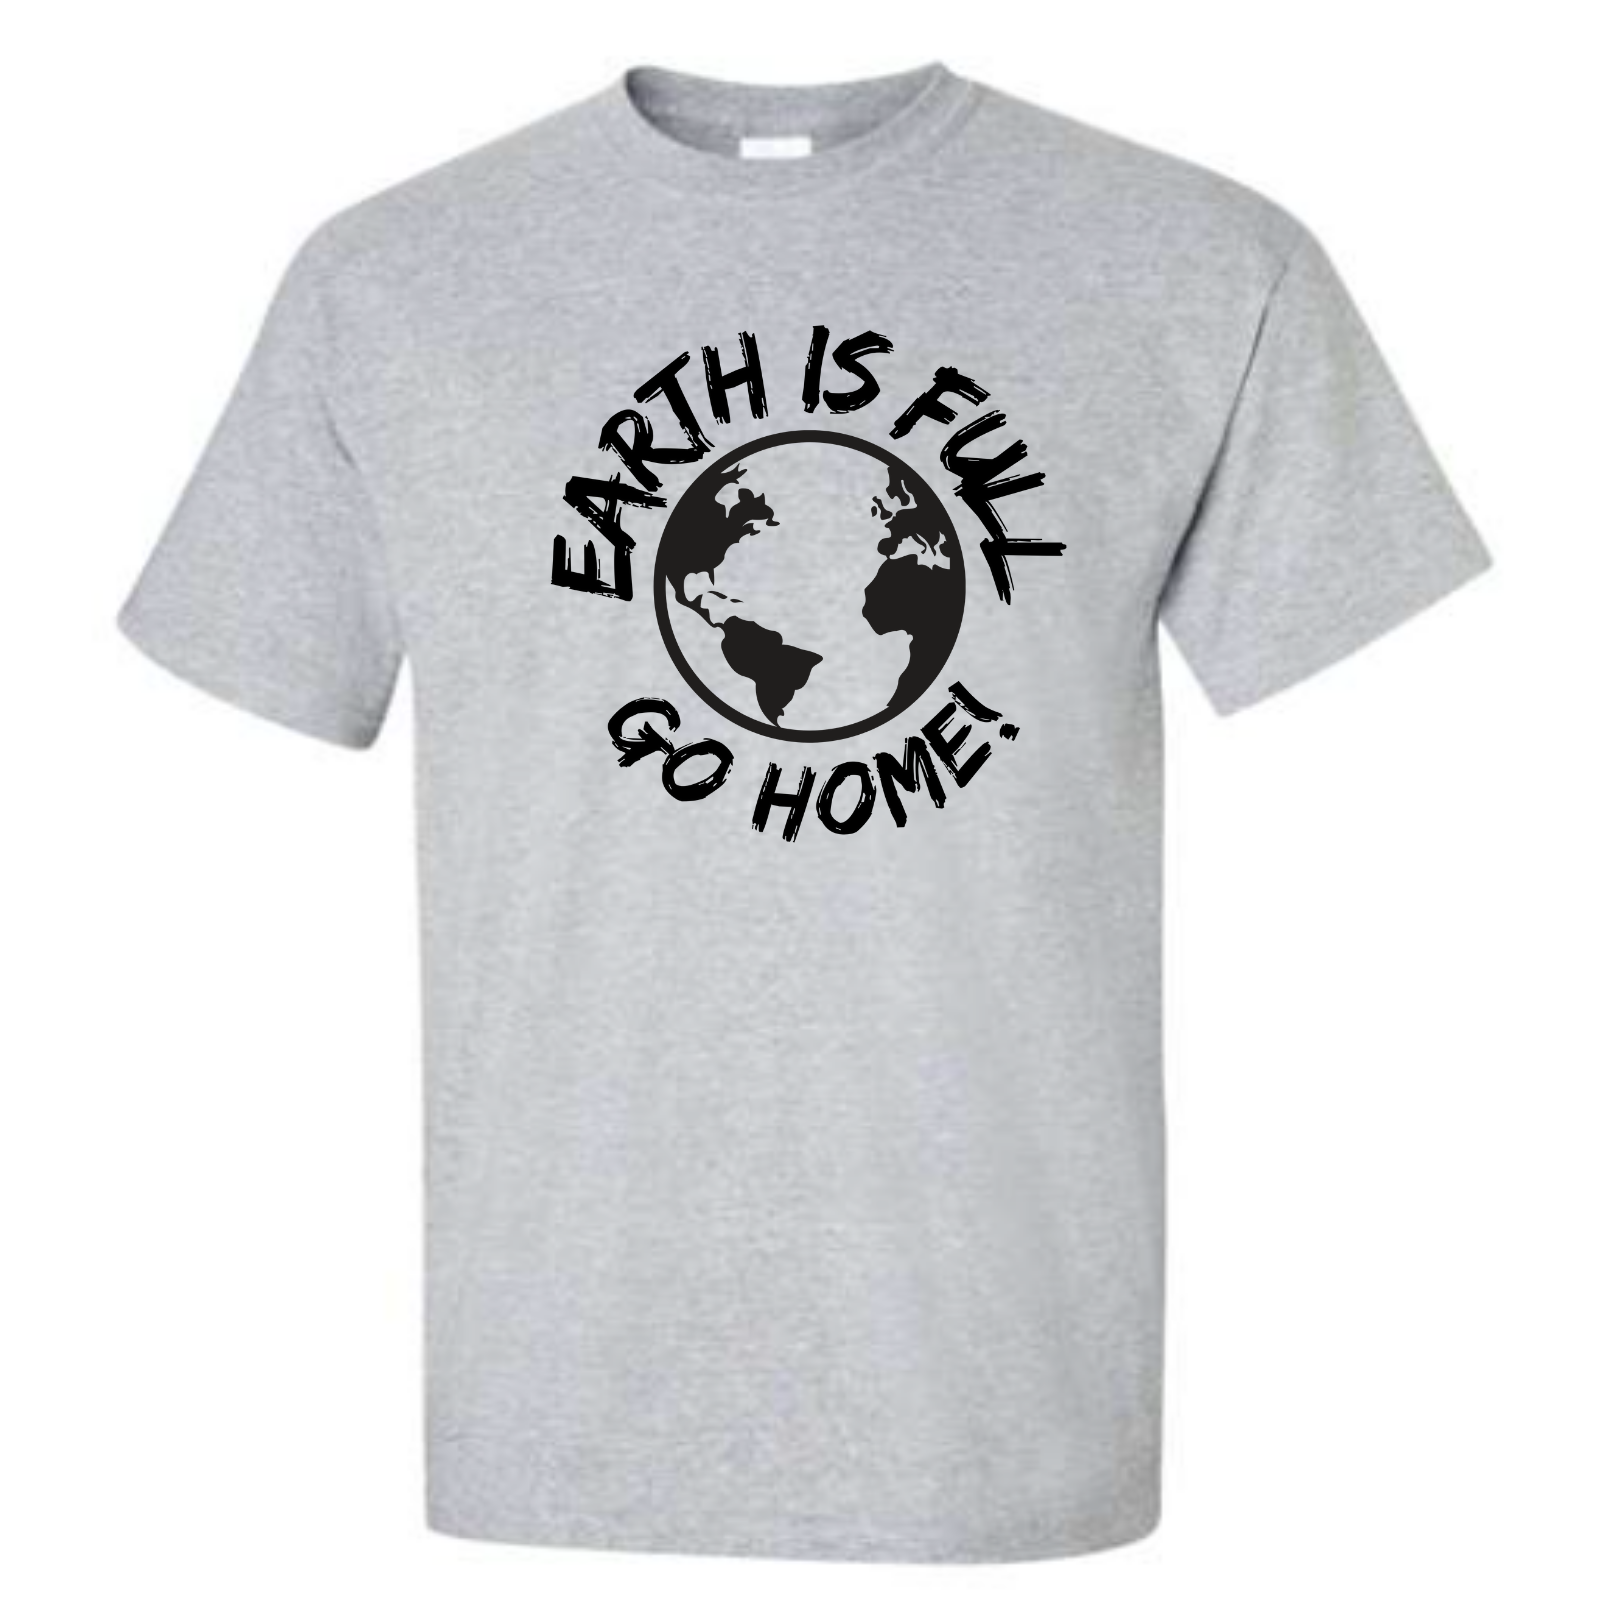 Earth is Full - Go Home! - Graphic Funny Sarcastic Humor T-Shirt - Mister Snarky's